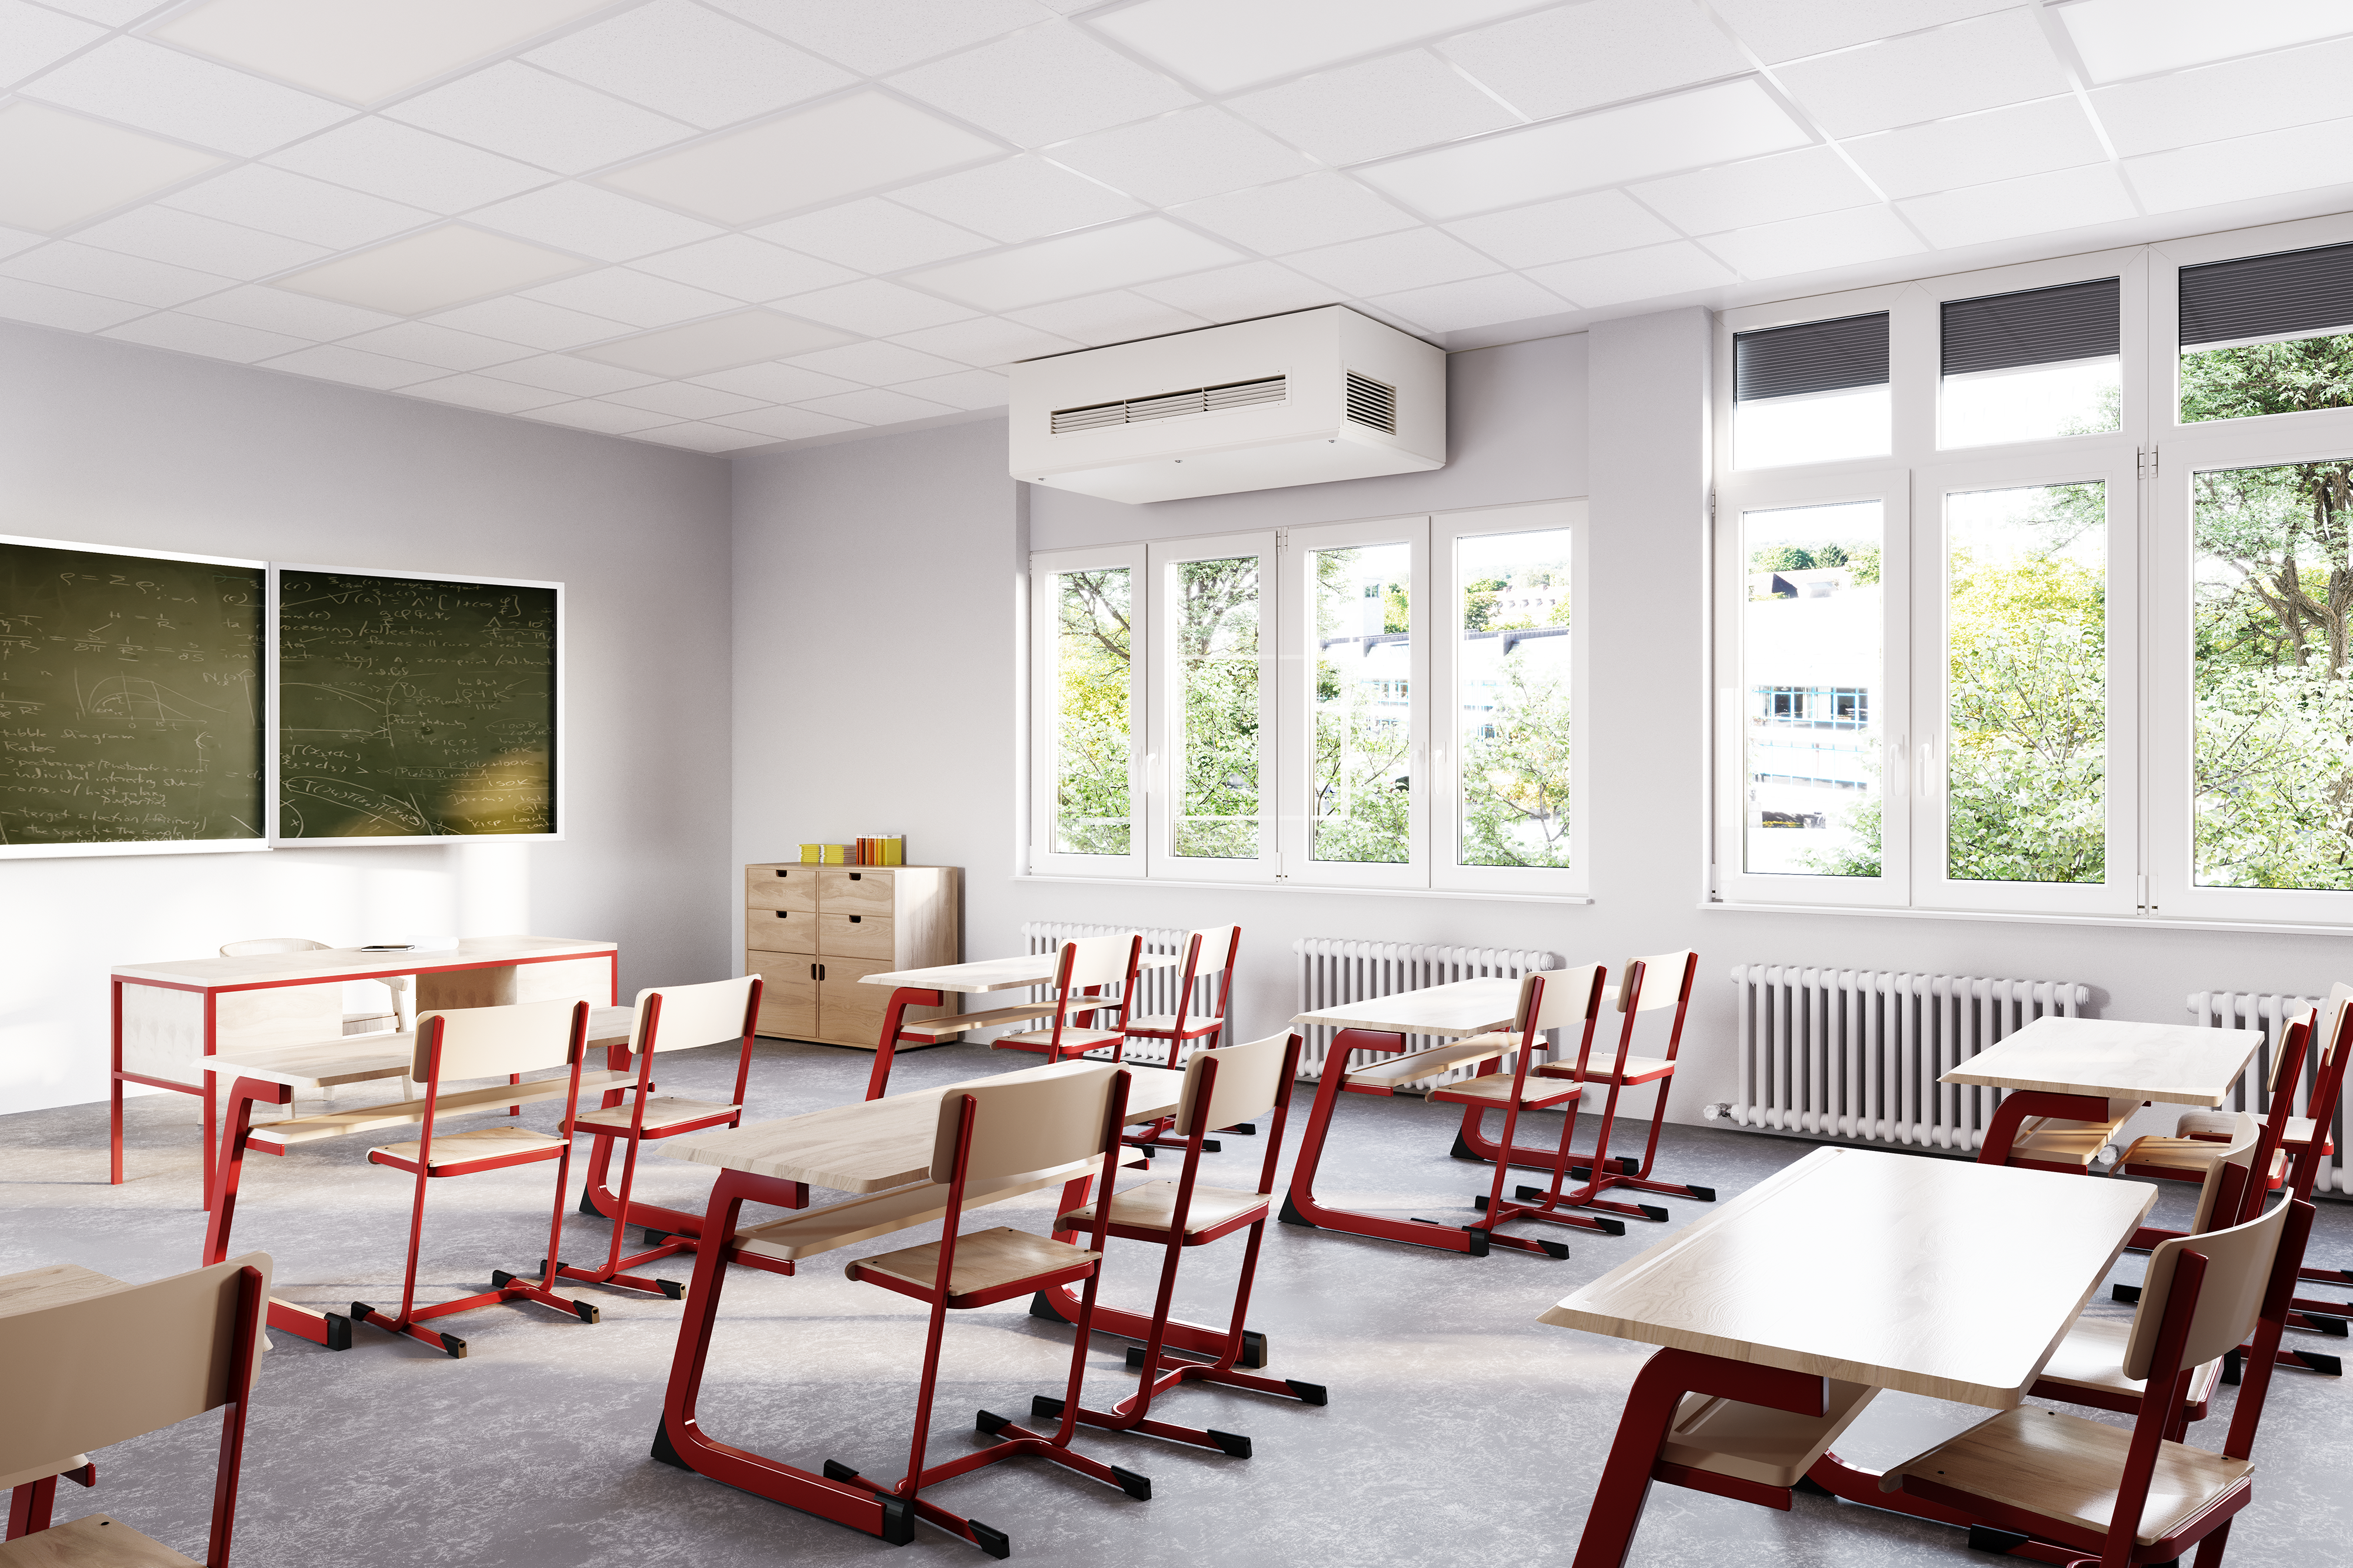 STIEBEL ELTRON VRL-C G Premium Decentralised Heat Recovery Ventilation Systems for Schools, Childcare Centres and Offices